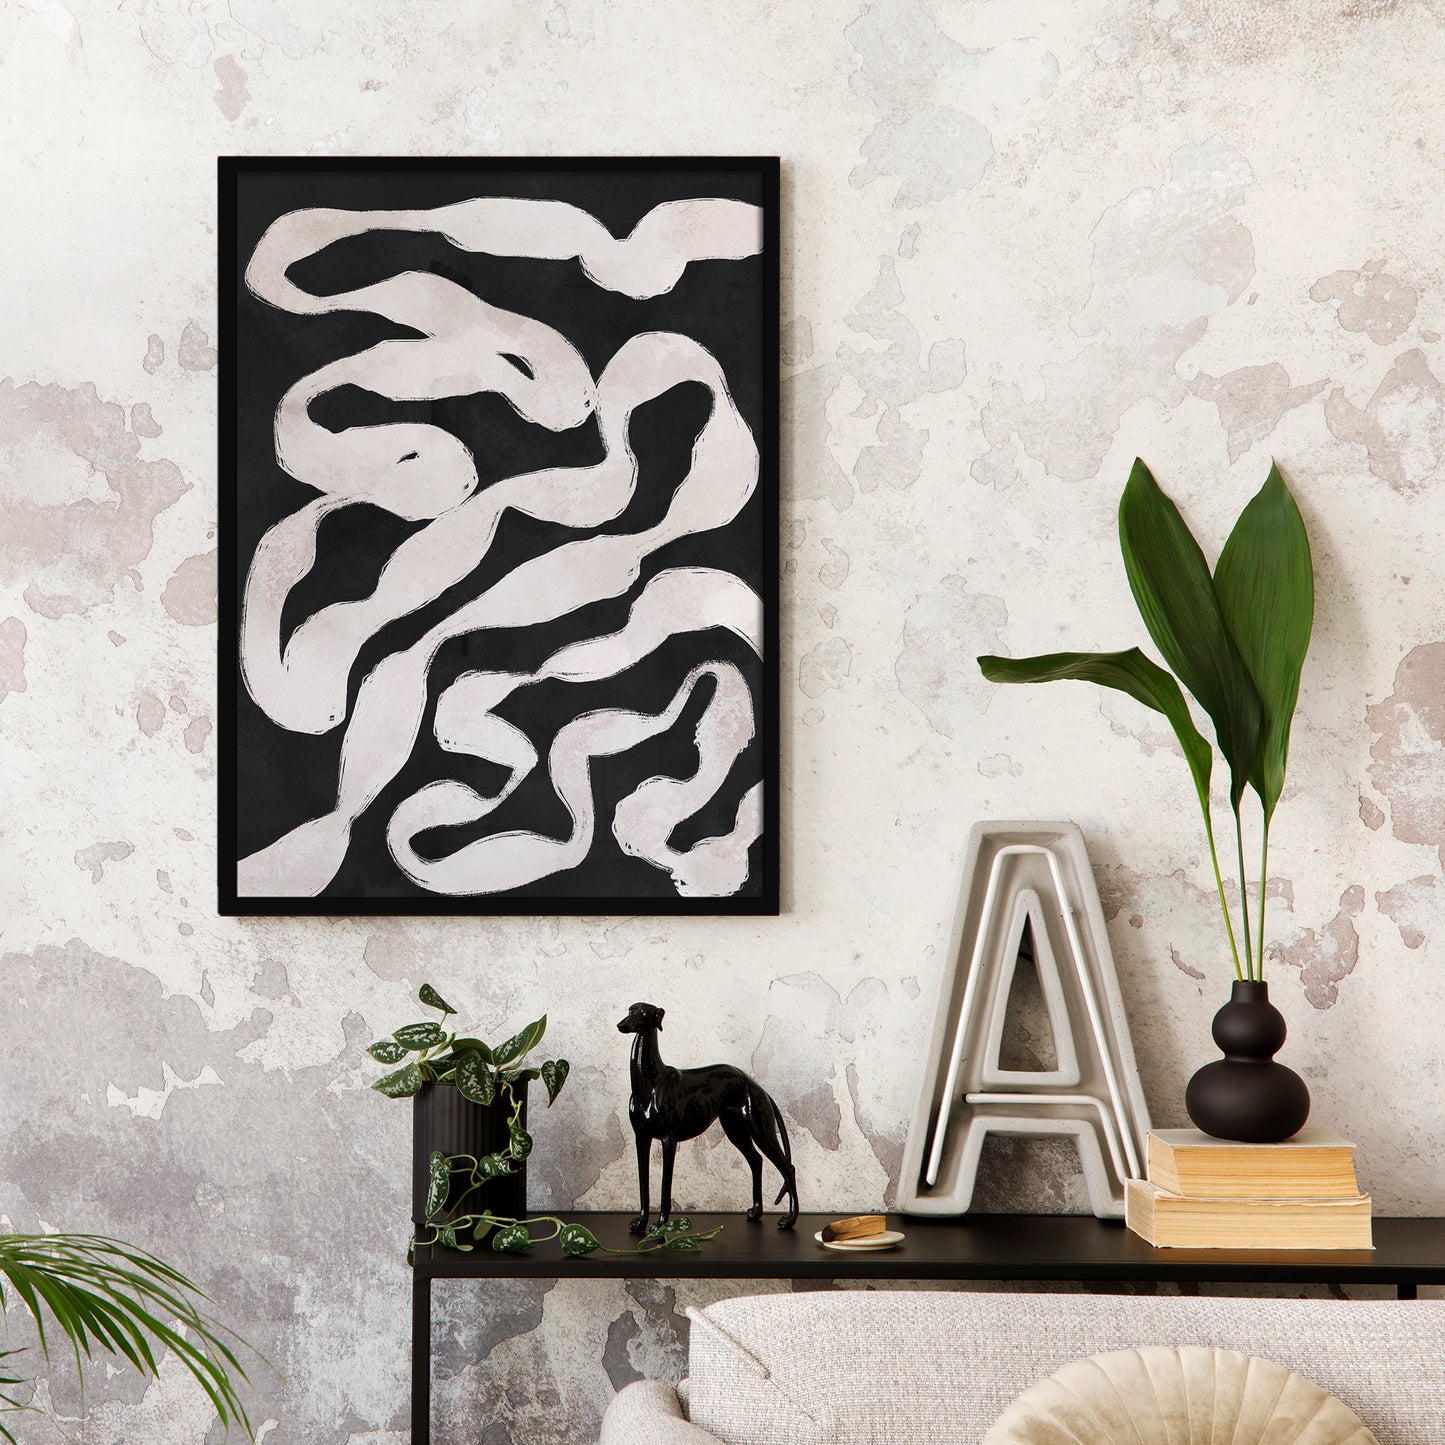 Black&White Abstract Shape Poster